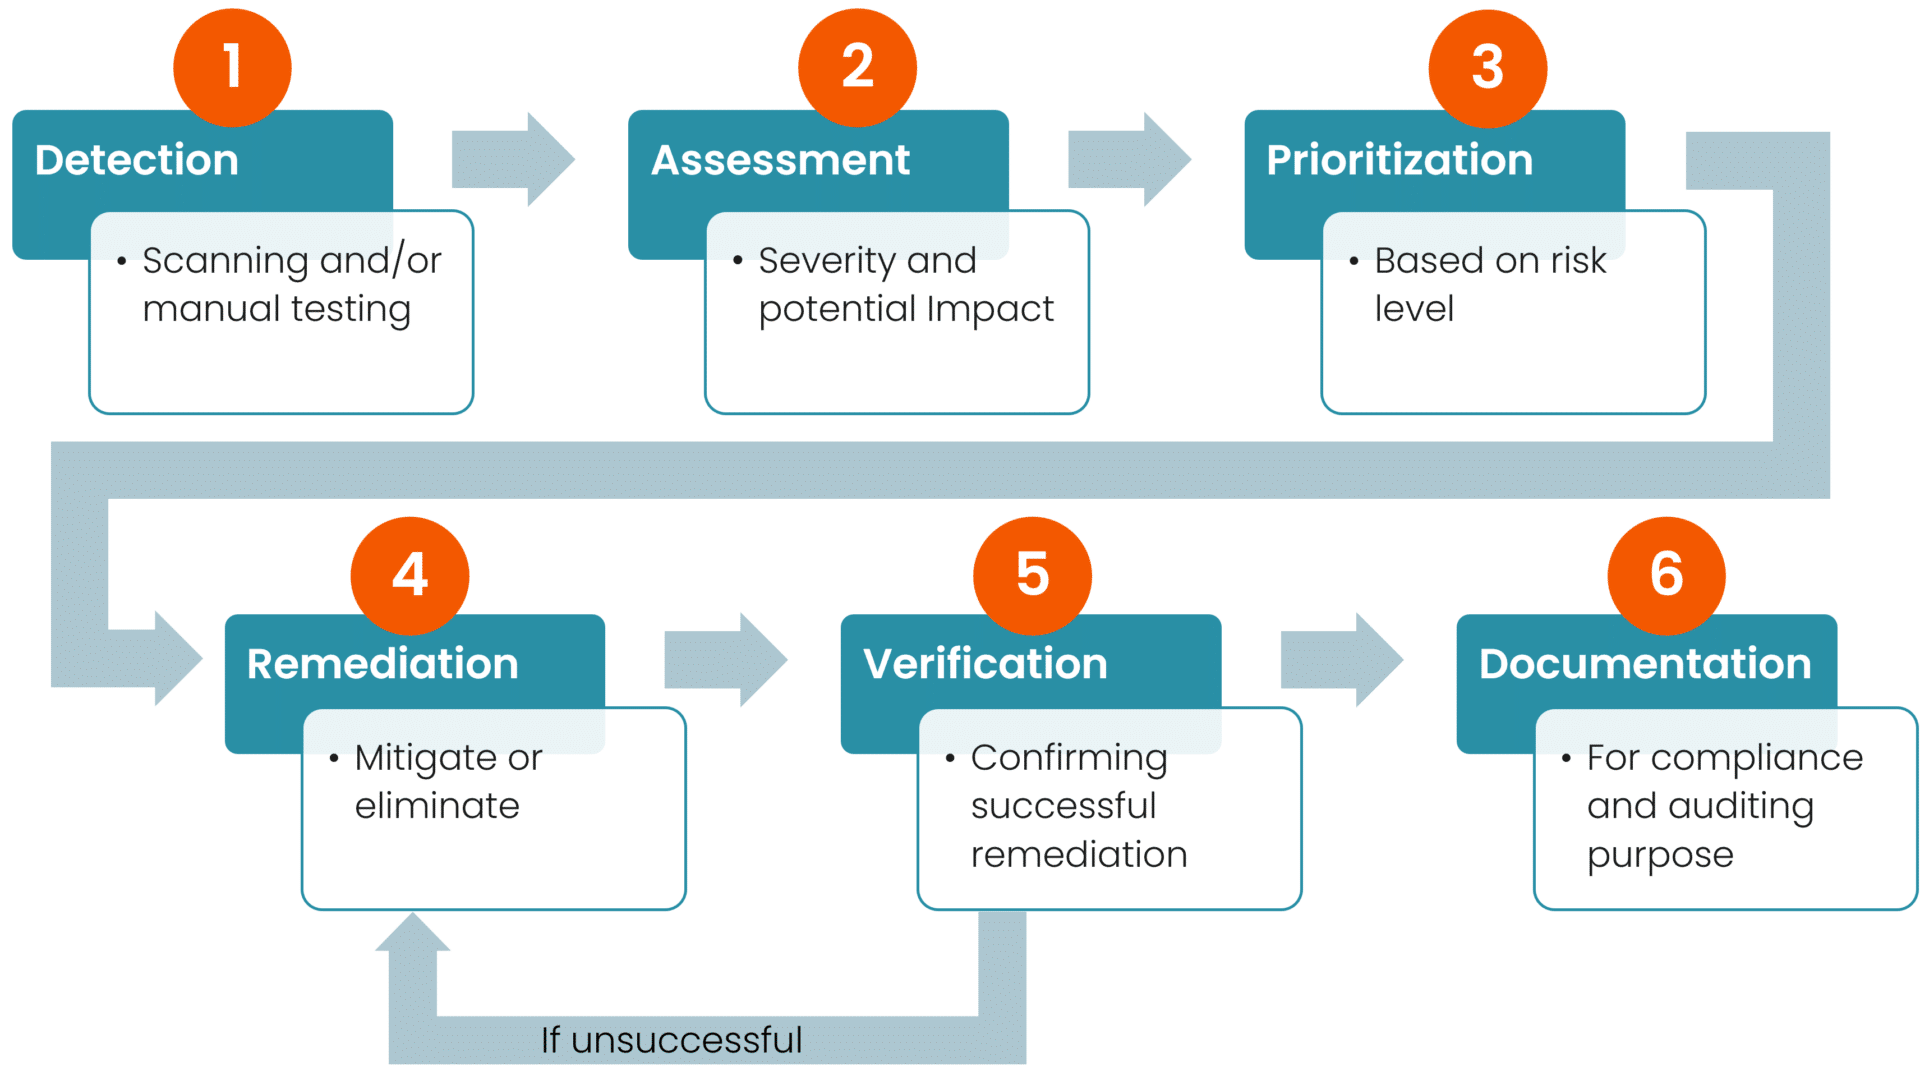 Vulnerability managment process. Detection, assessment, prioritization, remediation, verification and documentation. With an arrow from verification back to remediation if the verification fails. 